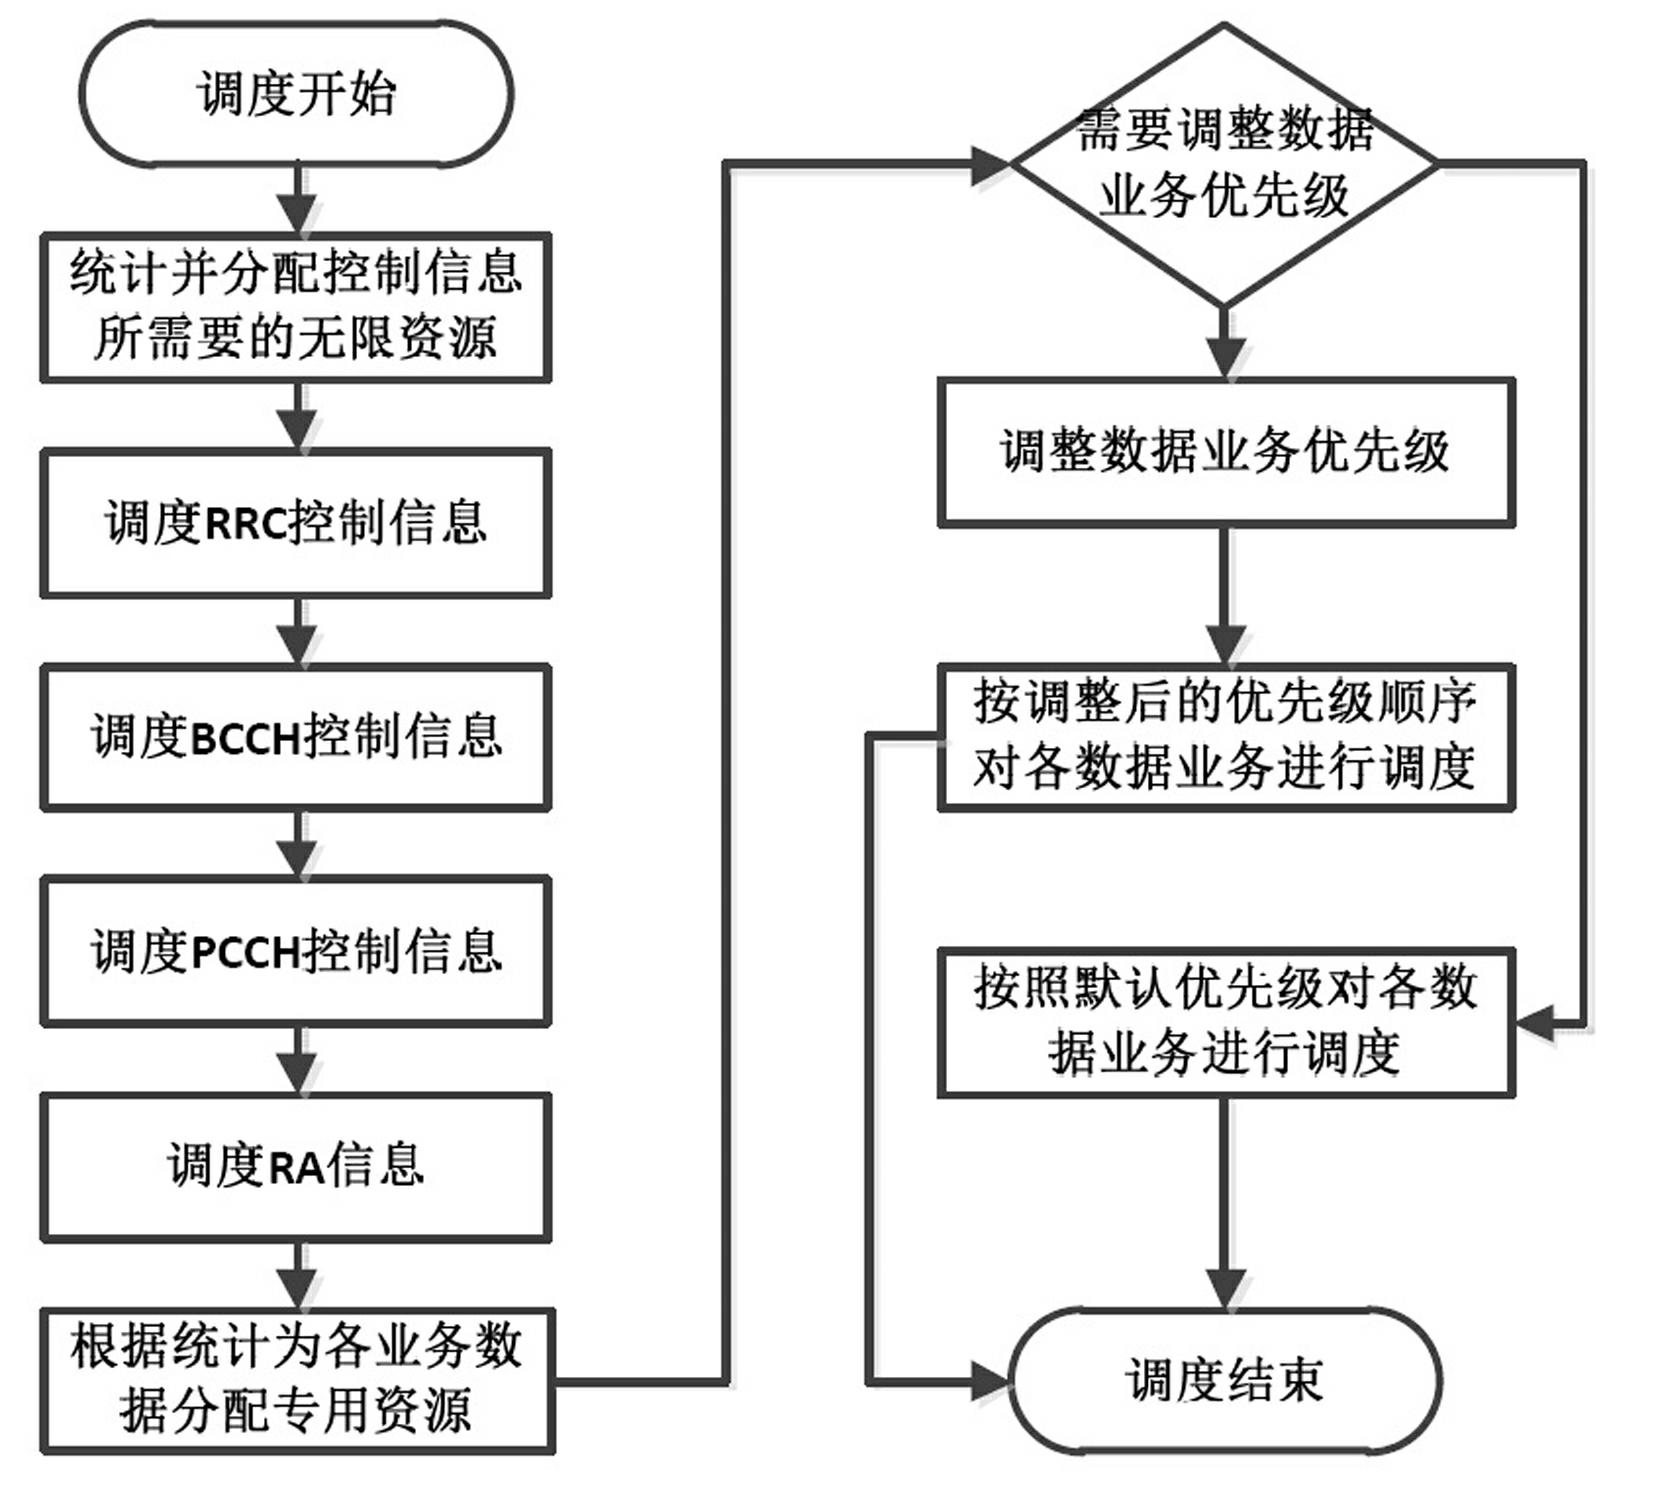 Distribution network access layer communication system construction method based on long term evolution (LTE) technique